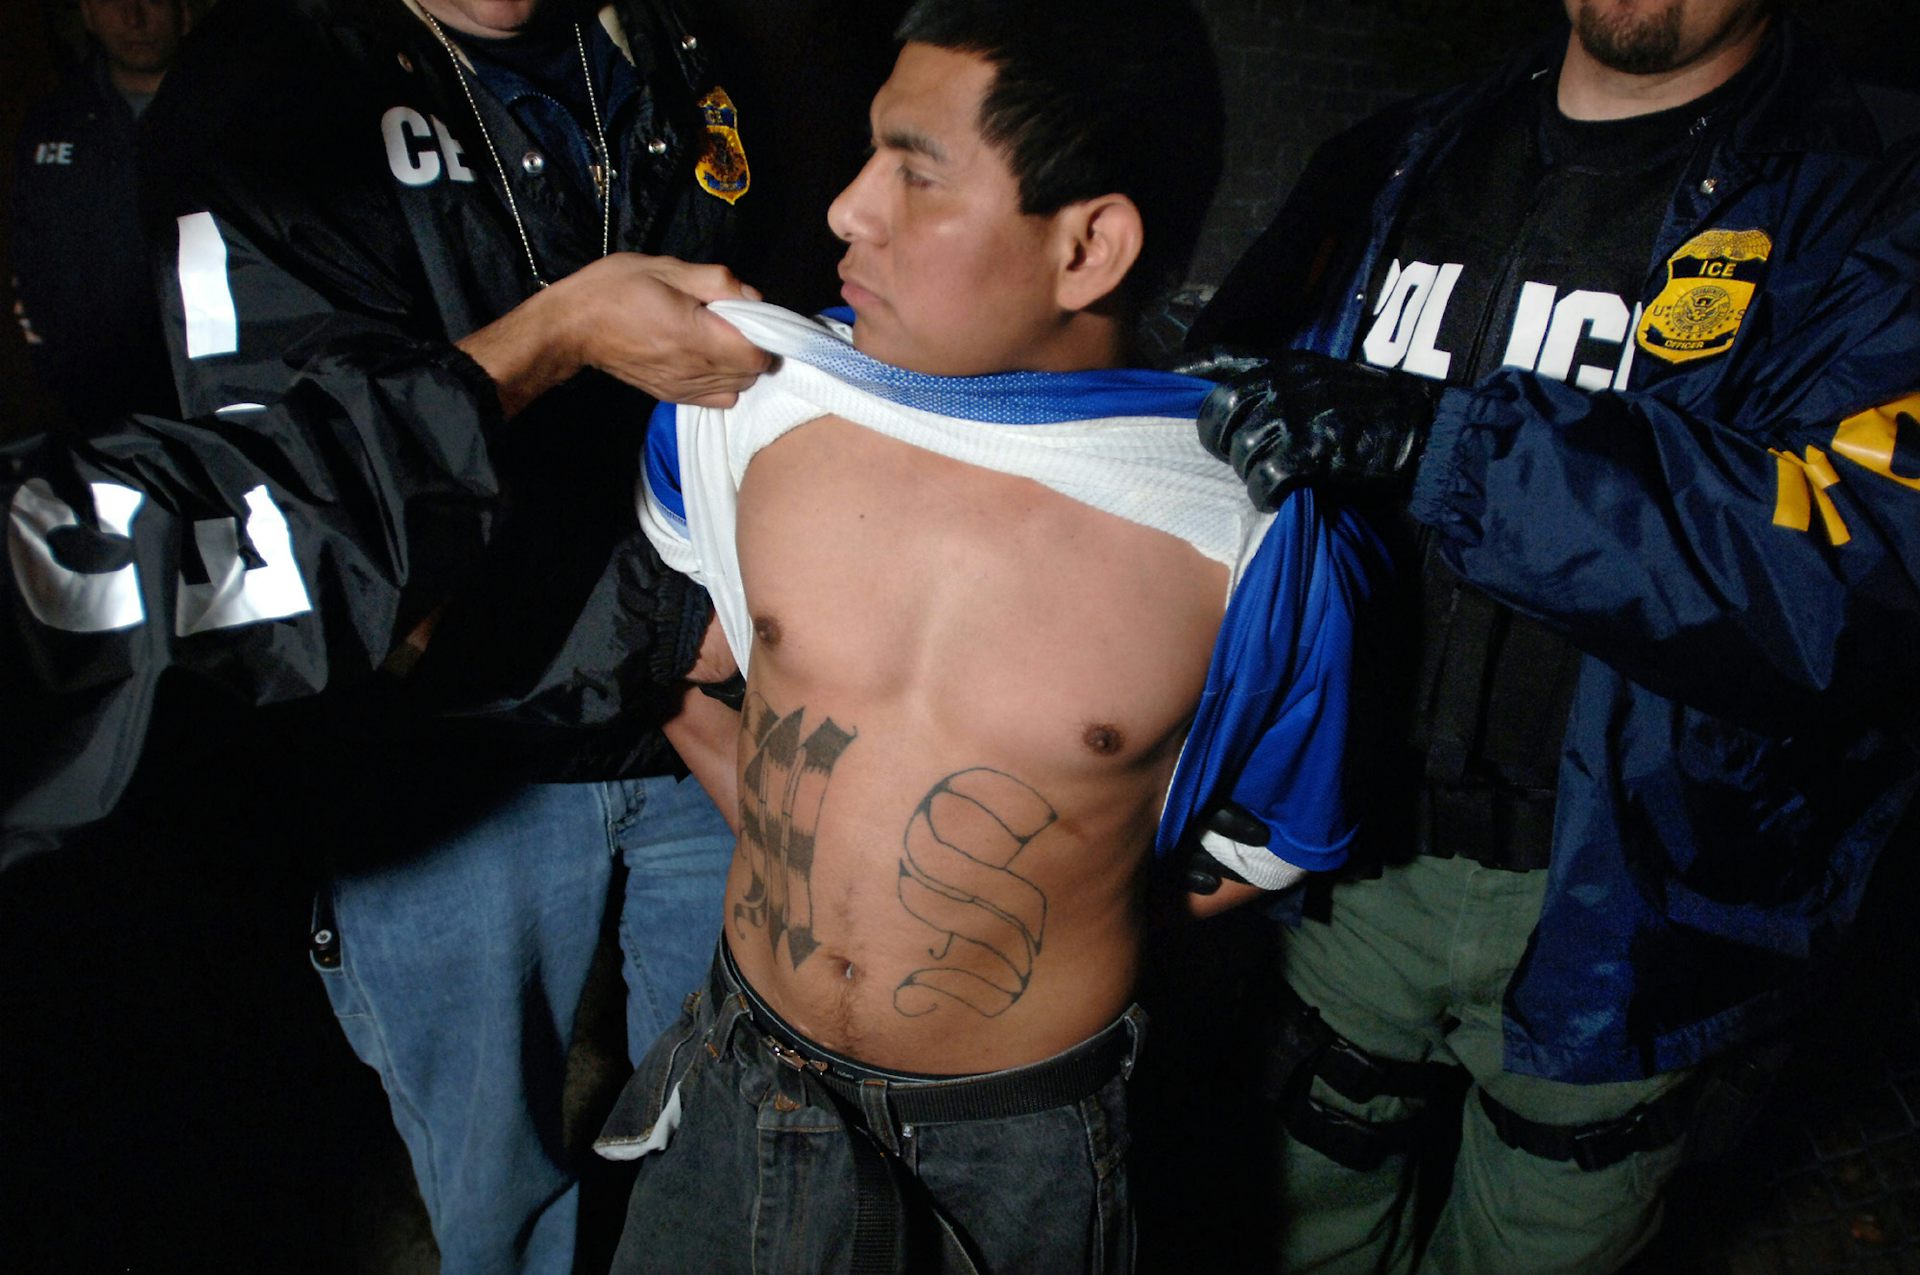 Former gang members in an El Salvadorian prison cross through their  distinctive tattoos  Daily Mail Online